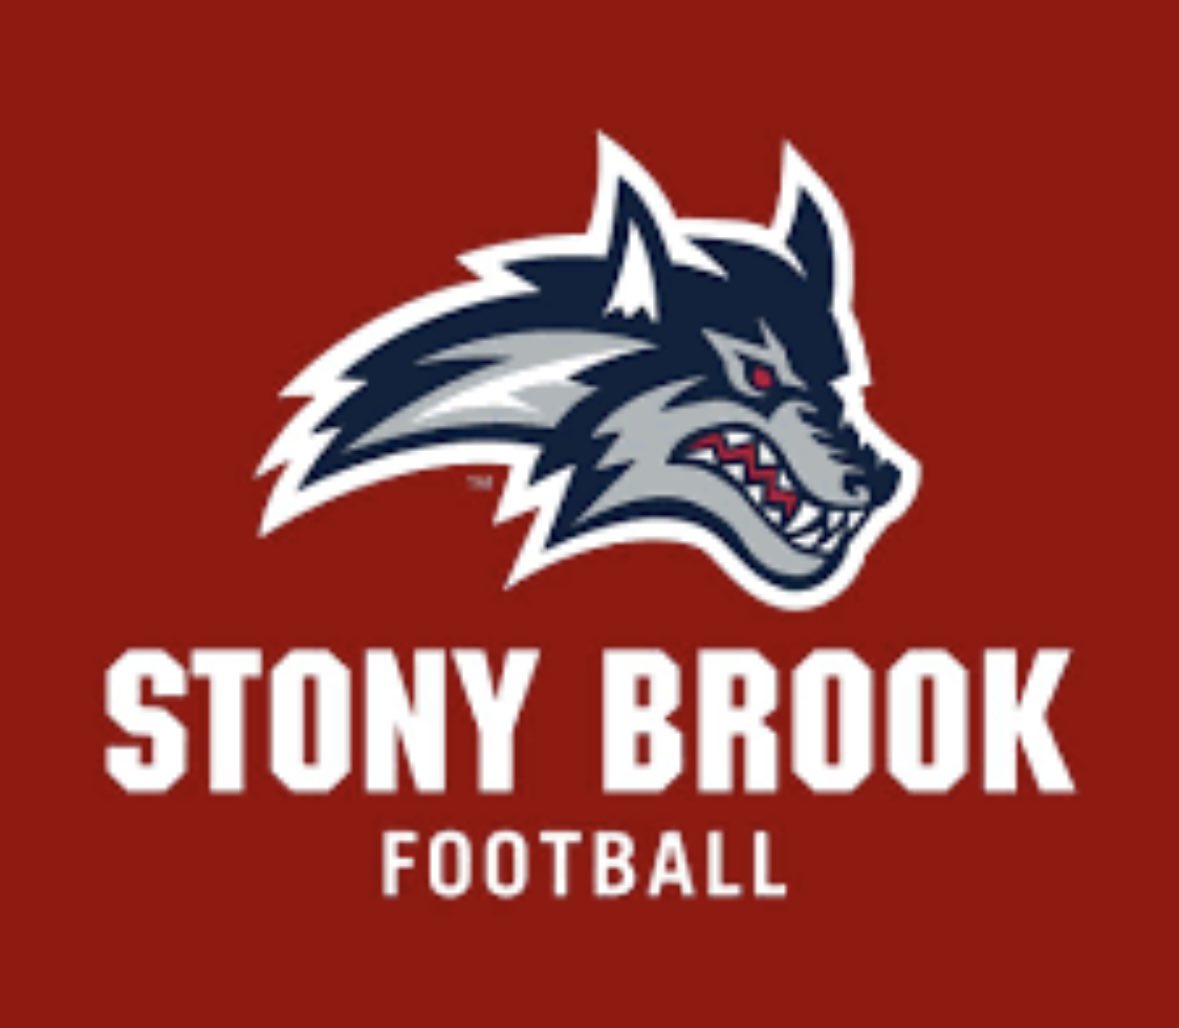 Blessed to announce I've received my first d1 offer (PWO) to Stonybrook!🐺 @CoachMartinoSBU @StonyBrookFB